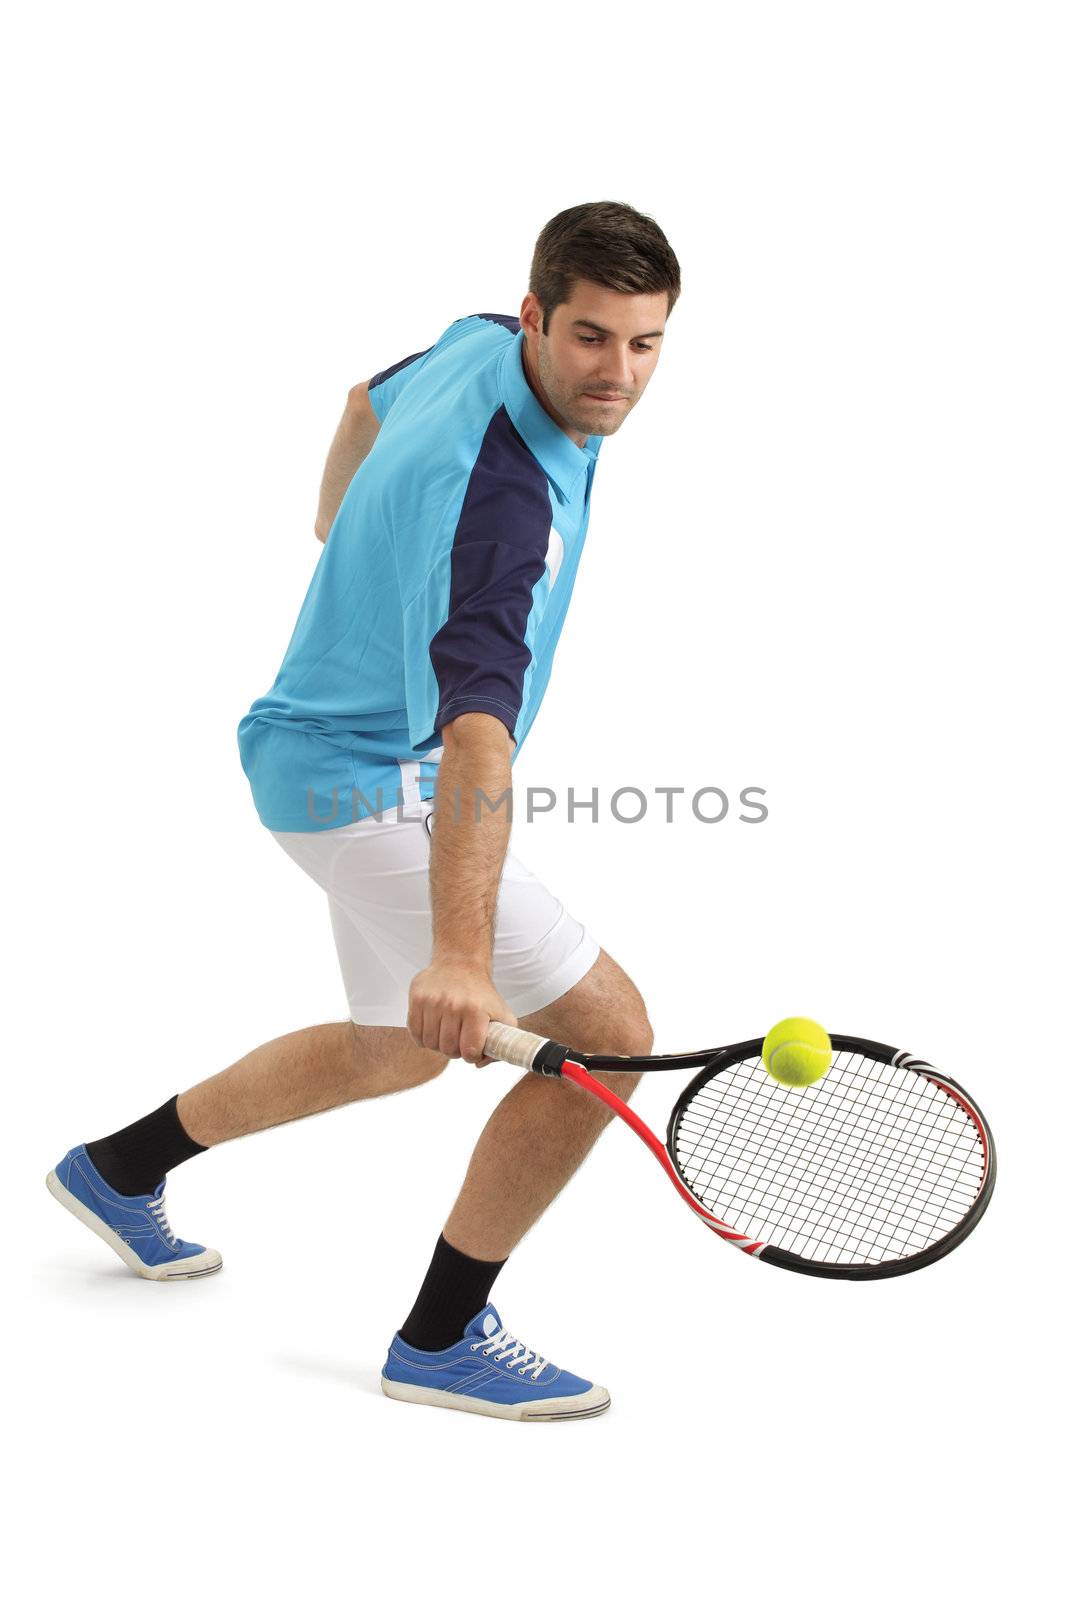 Photo of an attractive male tennis player hitting the tennis ball.